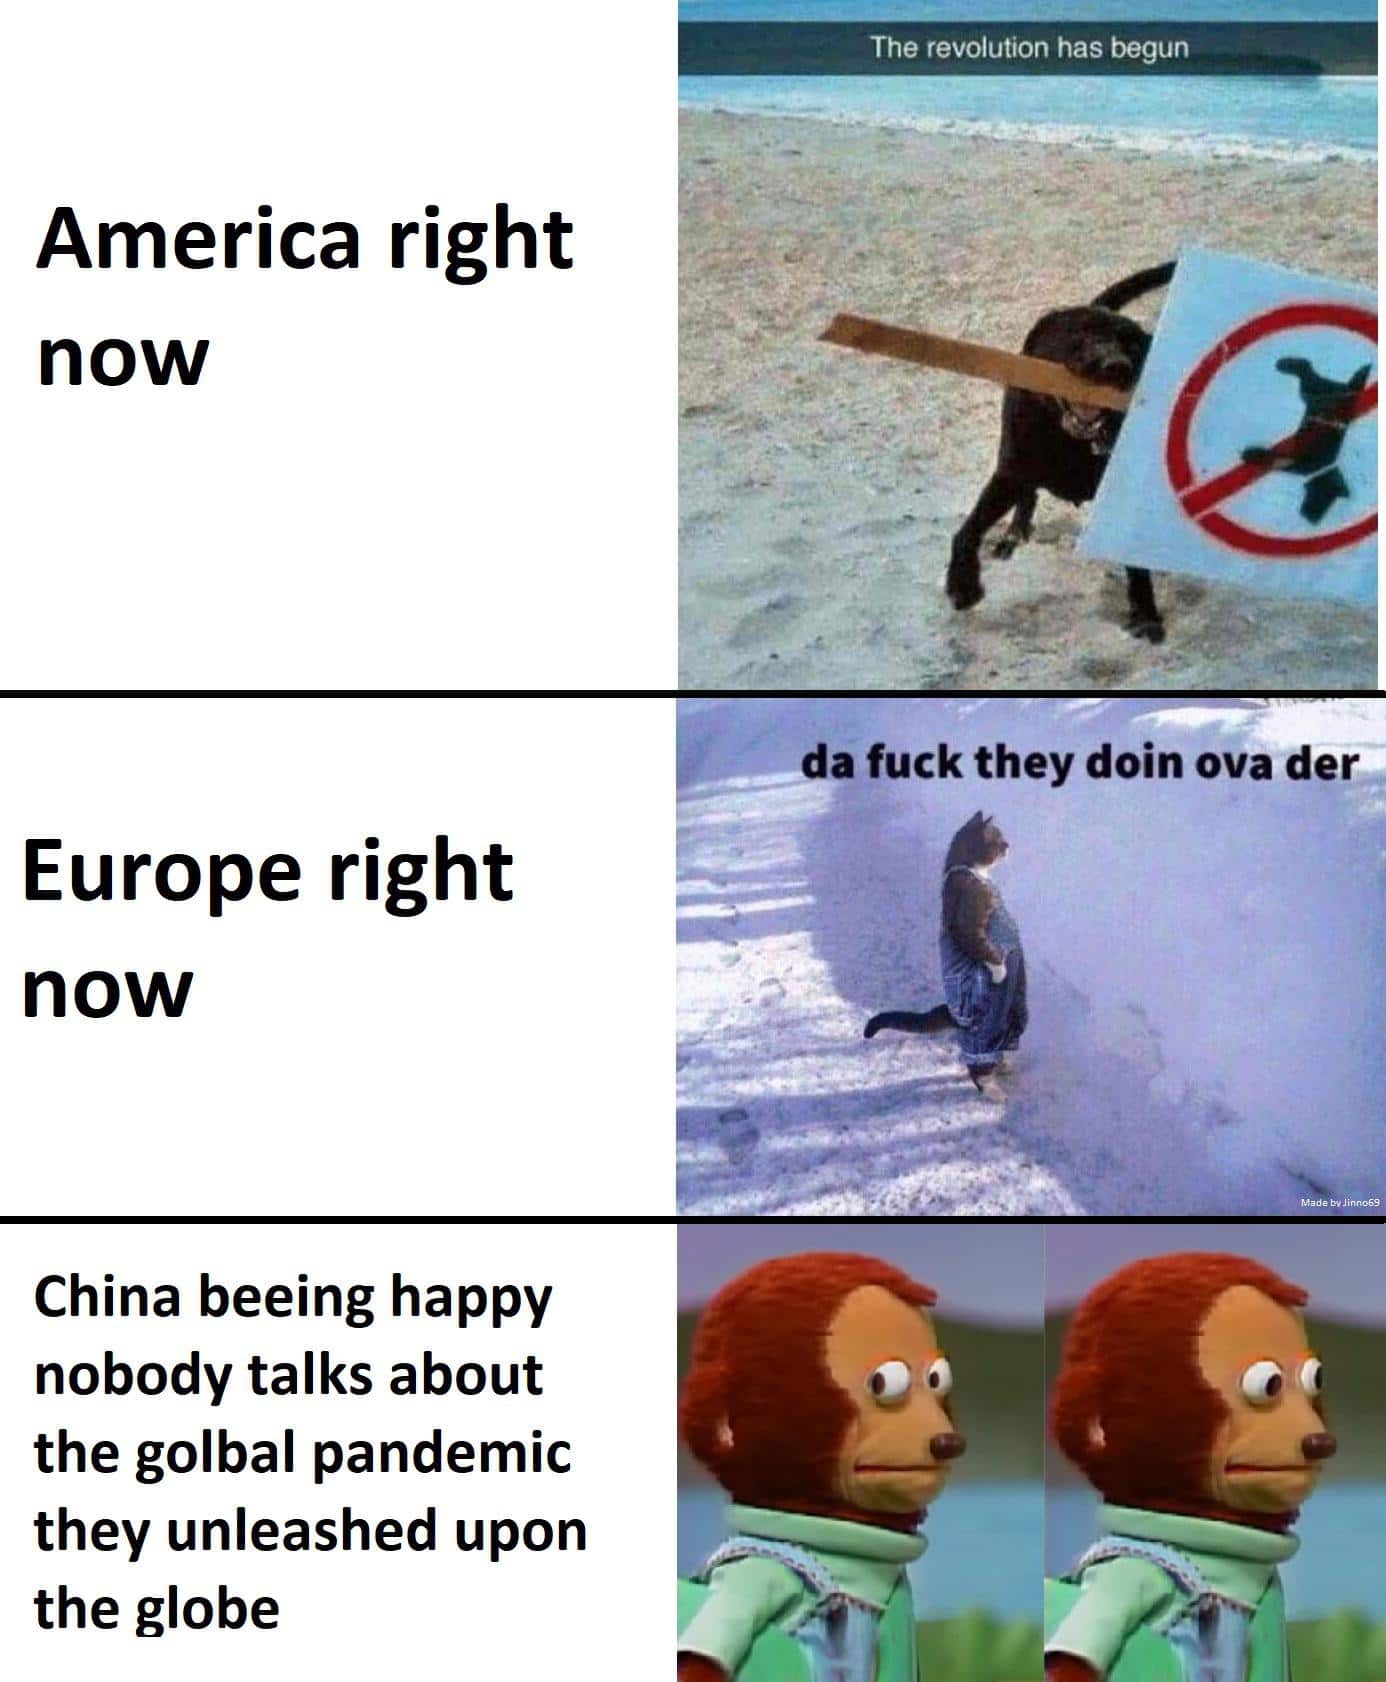 Dank, China, Hong Kong, Chinese, America, USA Dank Memes Dank, China, Hong Kong, Chinese, America, USA text: The revolution has begun America right now da fuck they doin ova der- Europe right now China beeing happy nobody talks about the golbal pandemic they unleashed upon the globe 